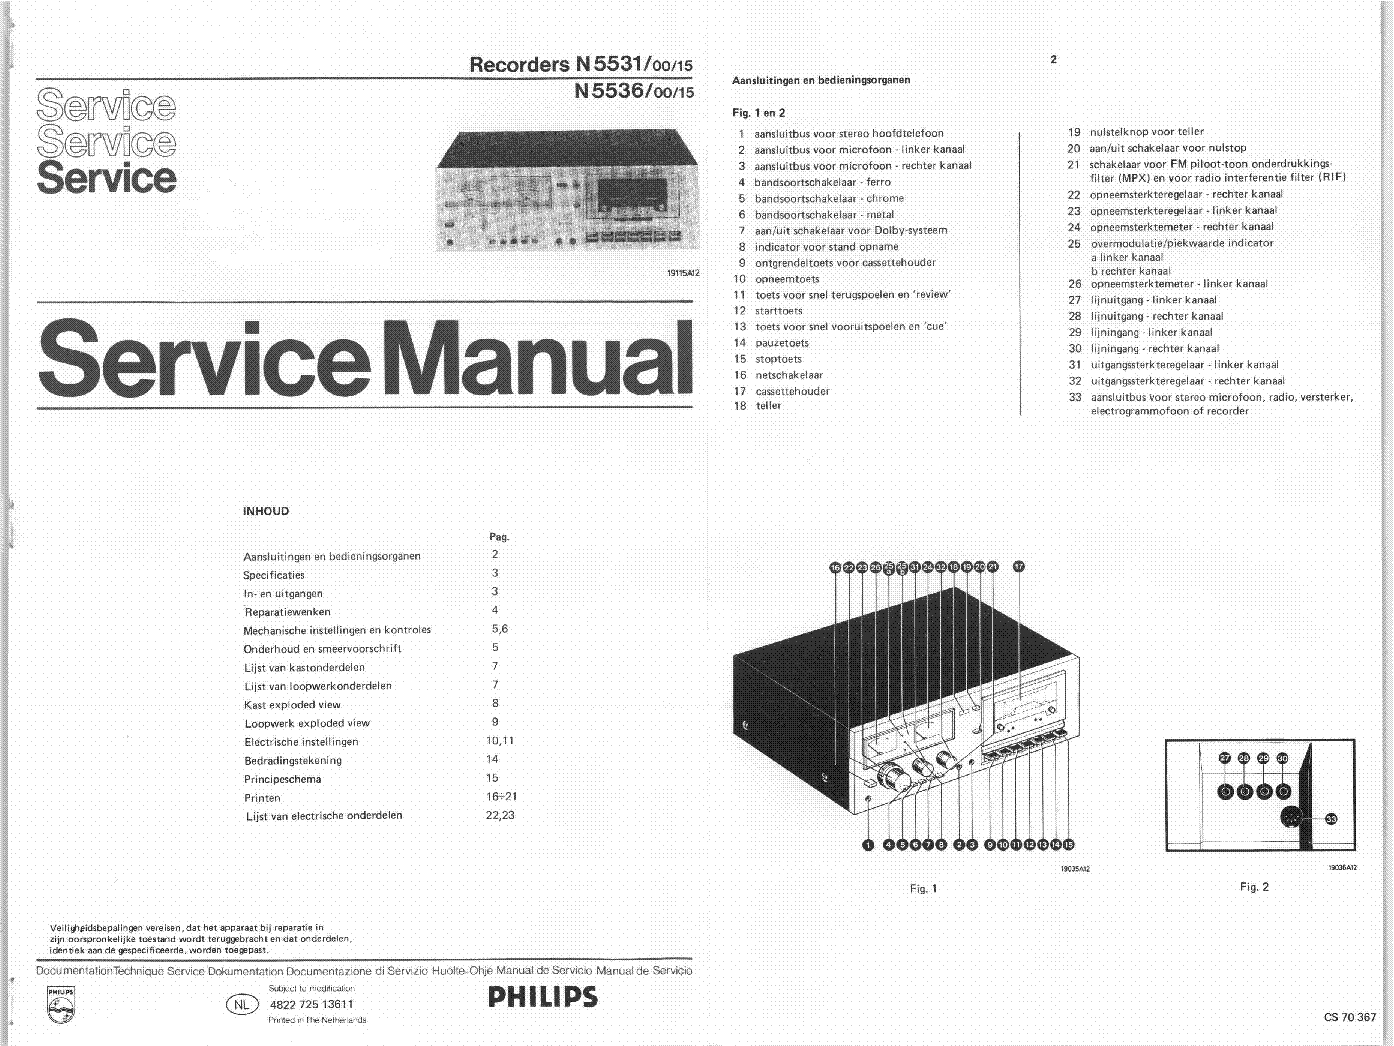 PHILIPS N5531 N5536 service manual (1st page)